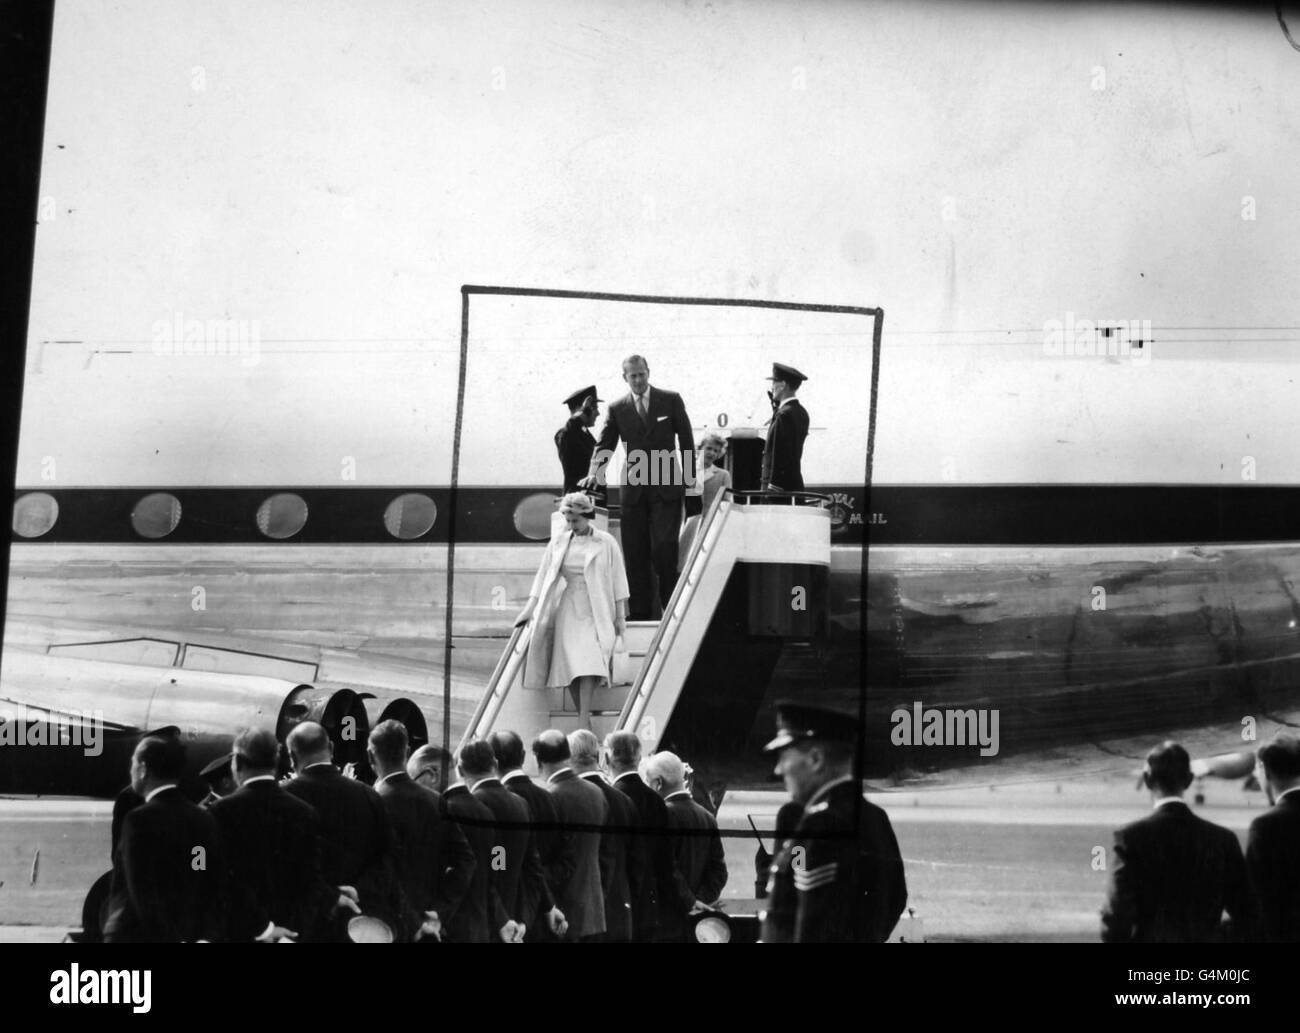 **Scanned low-res off contact** The Queen and the Duke of Edinburgh on their arrival at Heathrow Airport, after their flight from Canada and the royal tour. Stock Photo